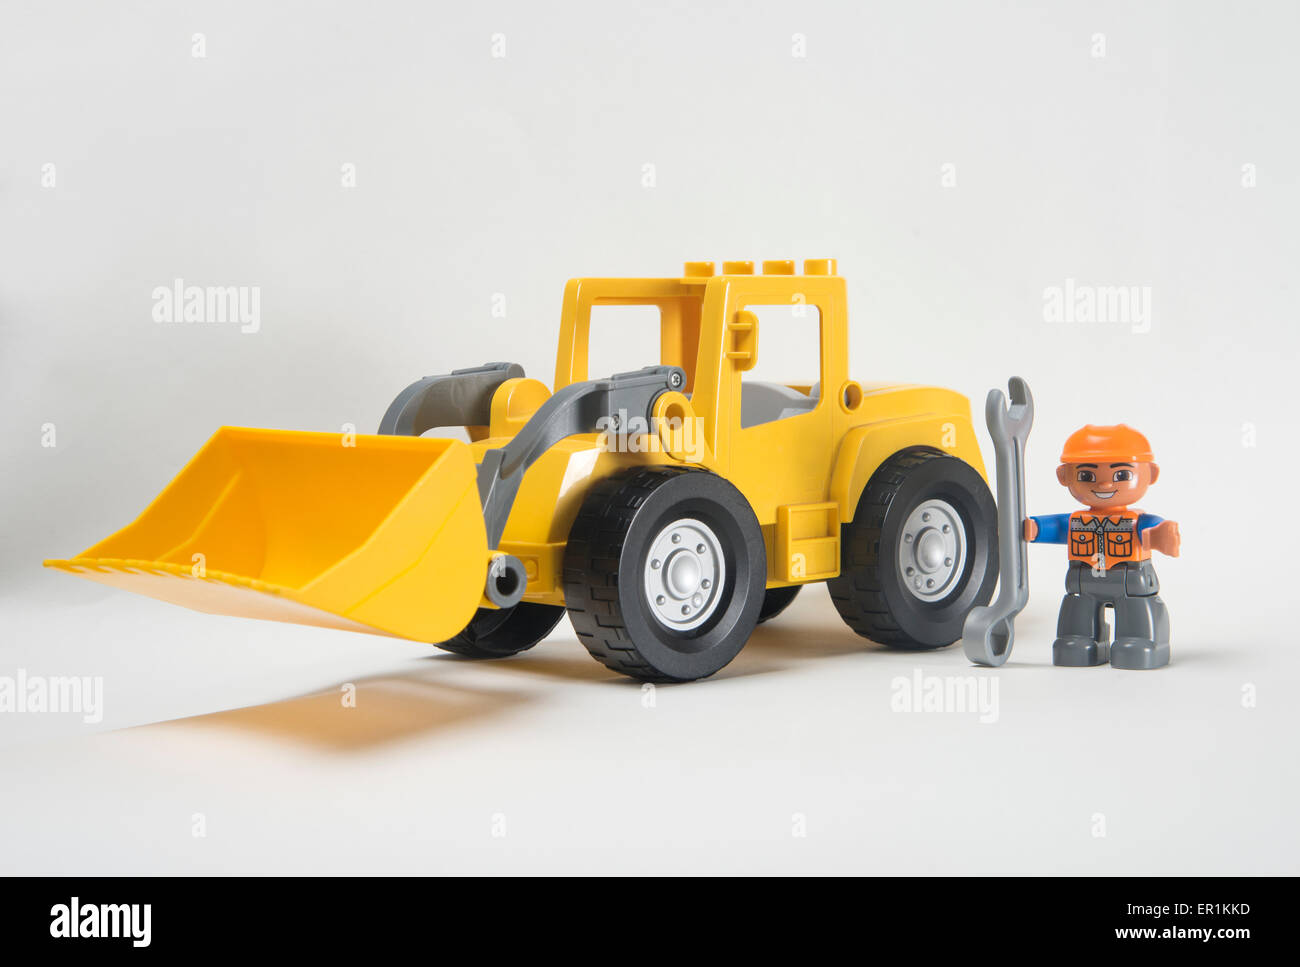 Man at work. Lego Duplo front loader digger with driver holding spanner  Stock Photo - Alamy